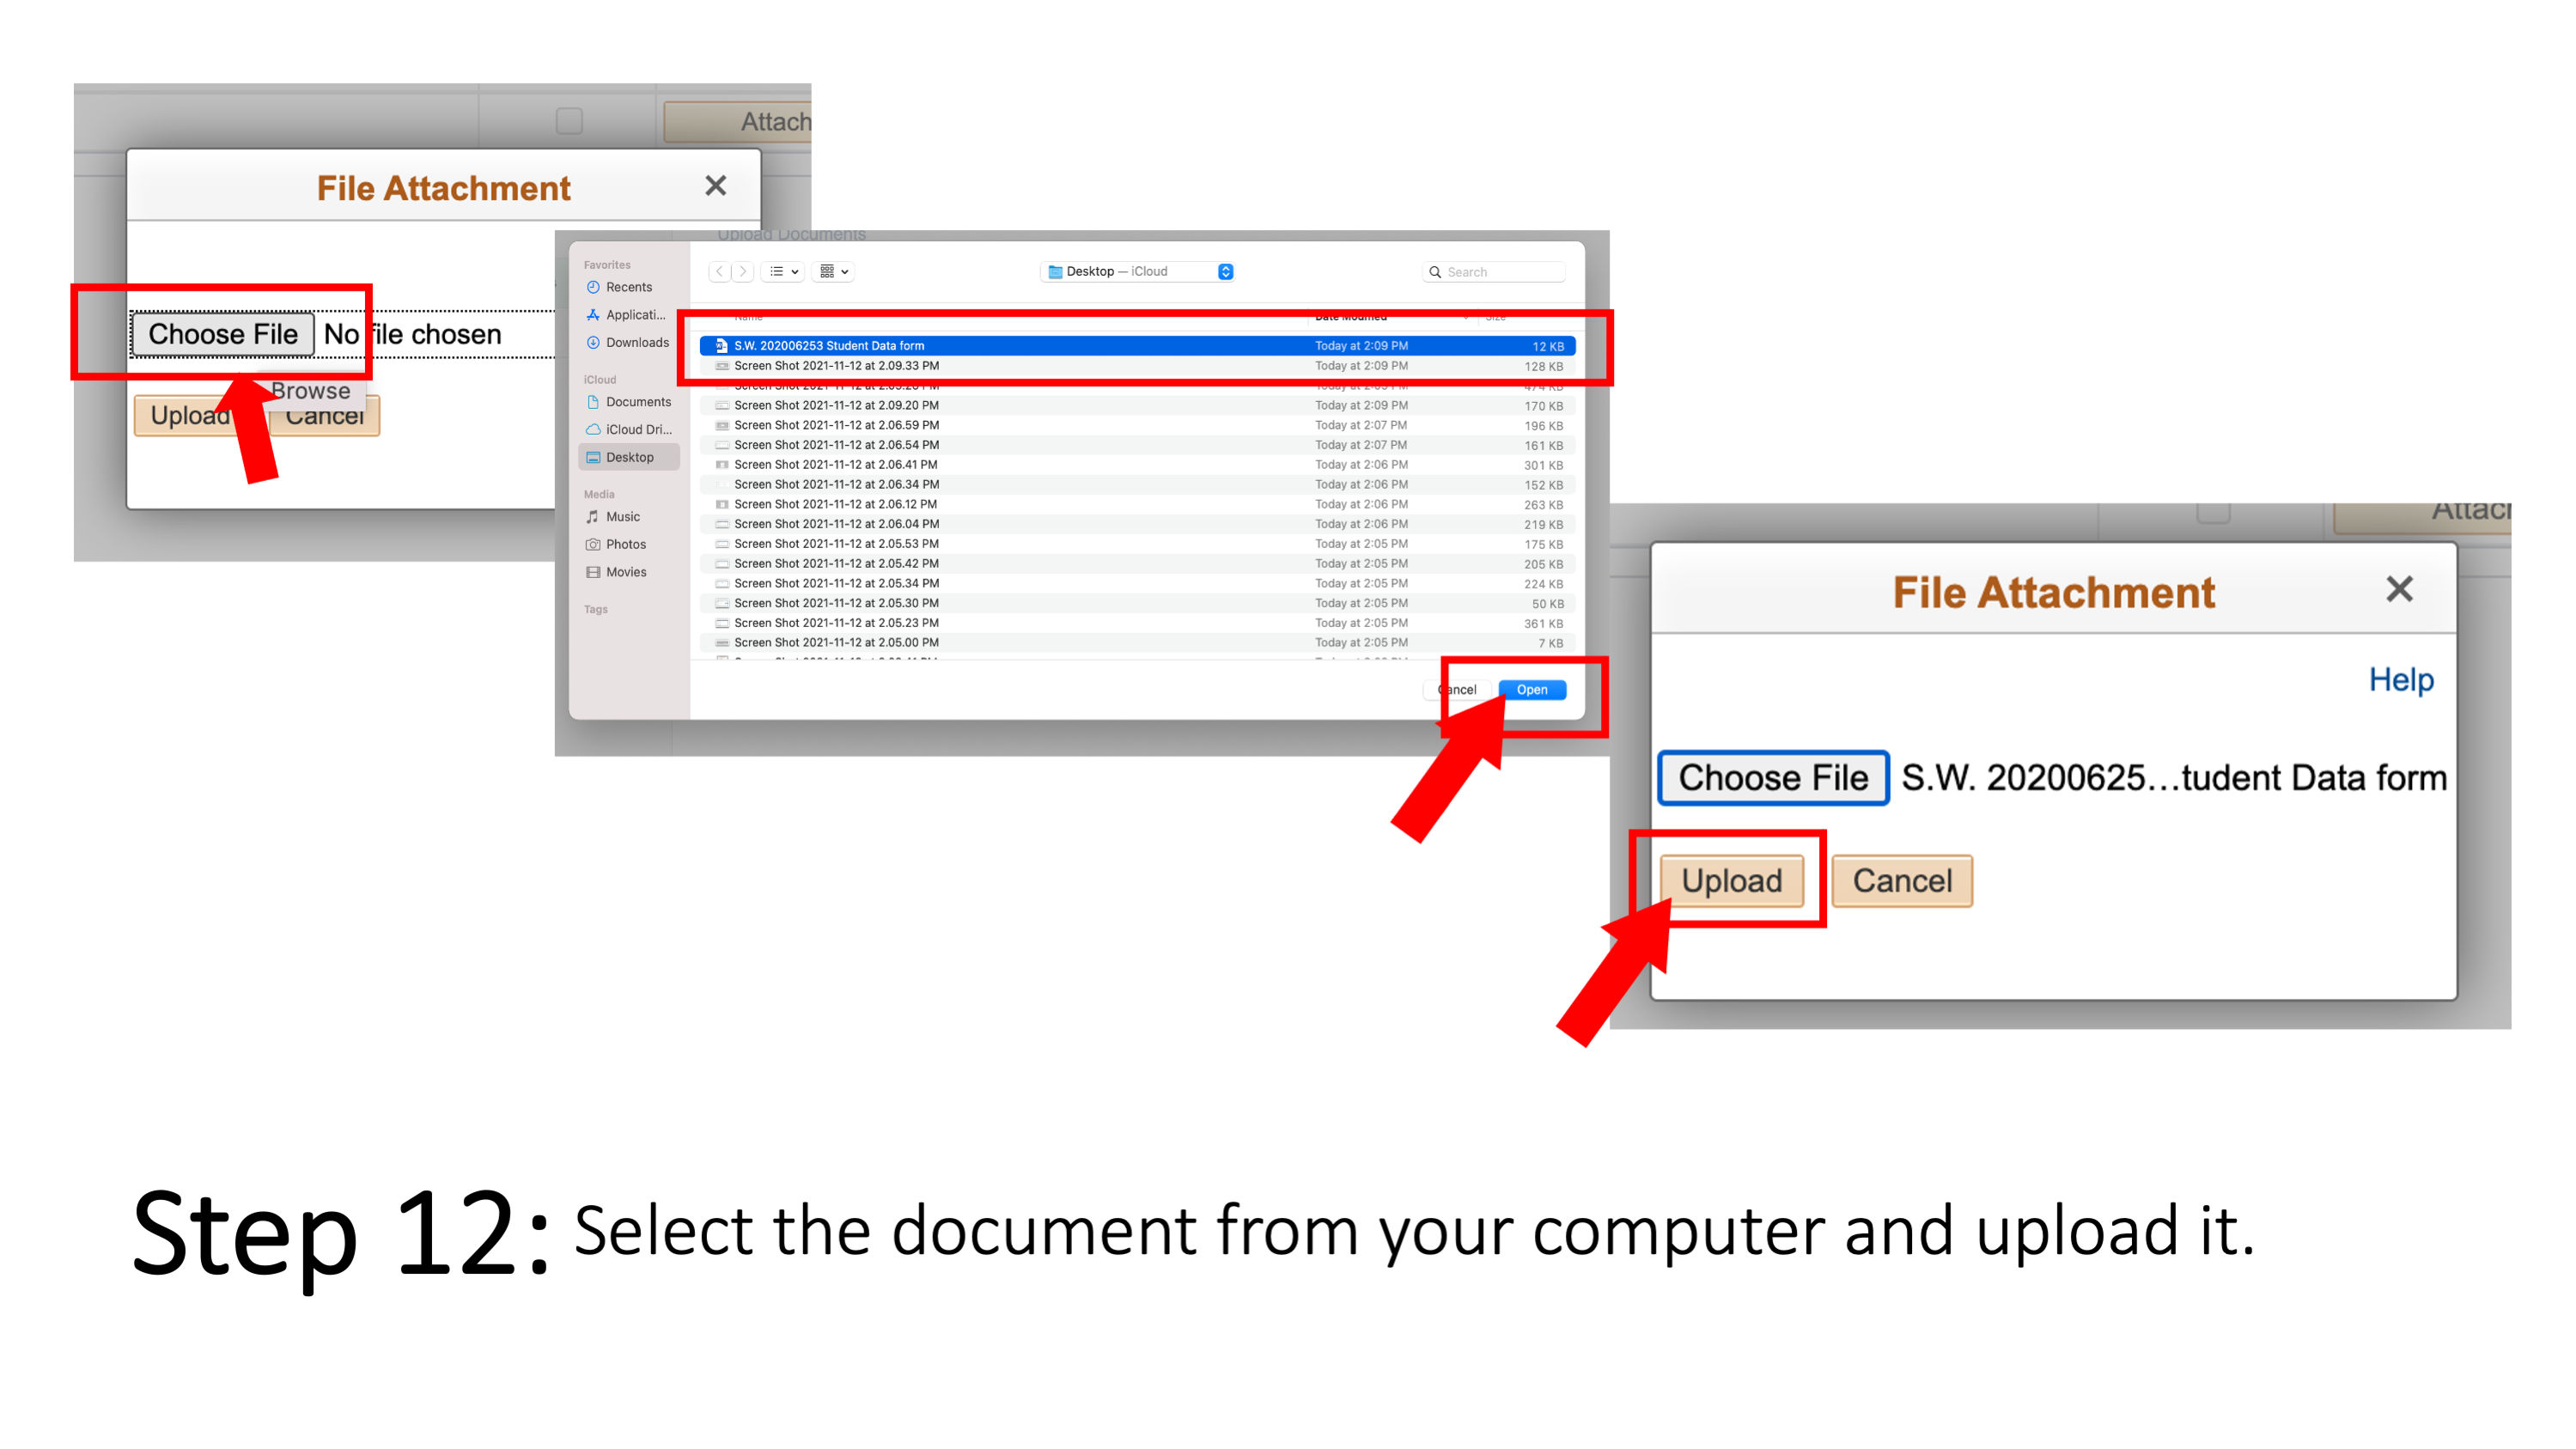 Slide 13 - Step 12: Select the document from your computer and upload it. 